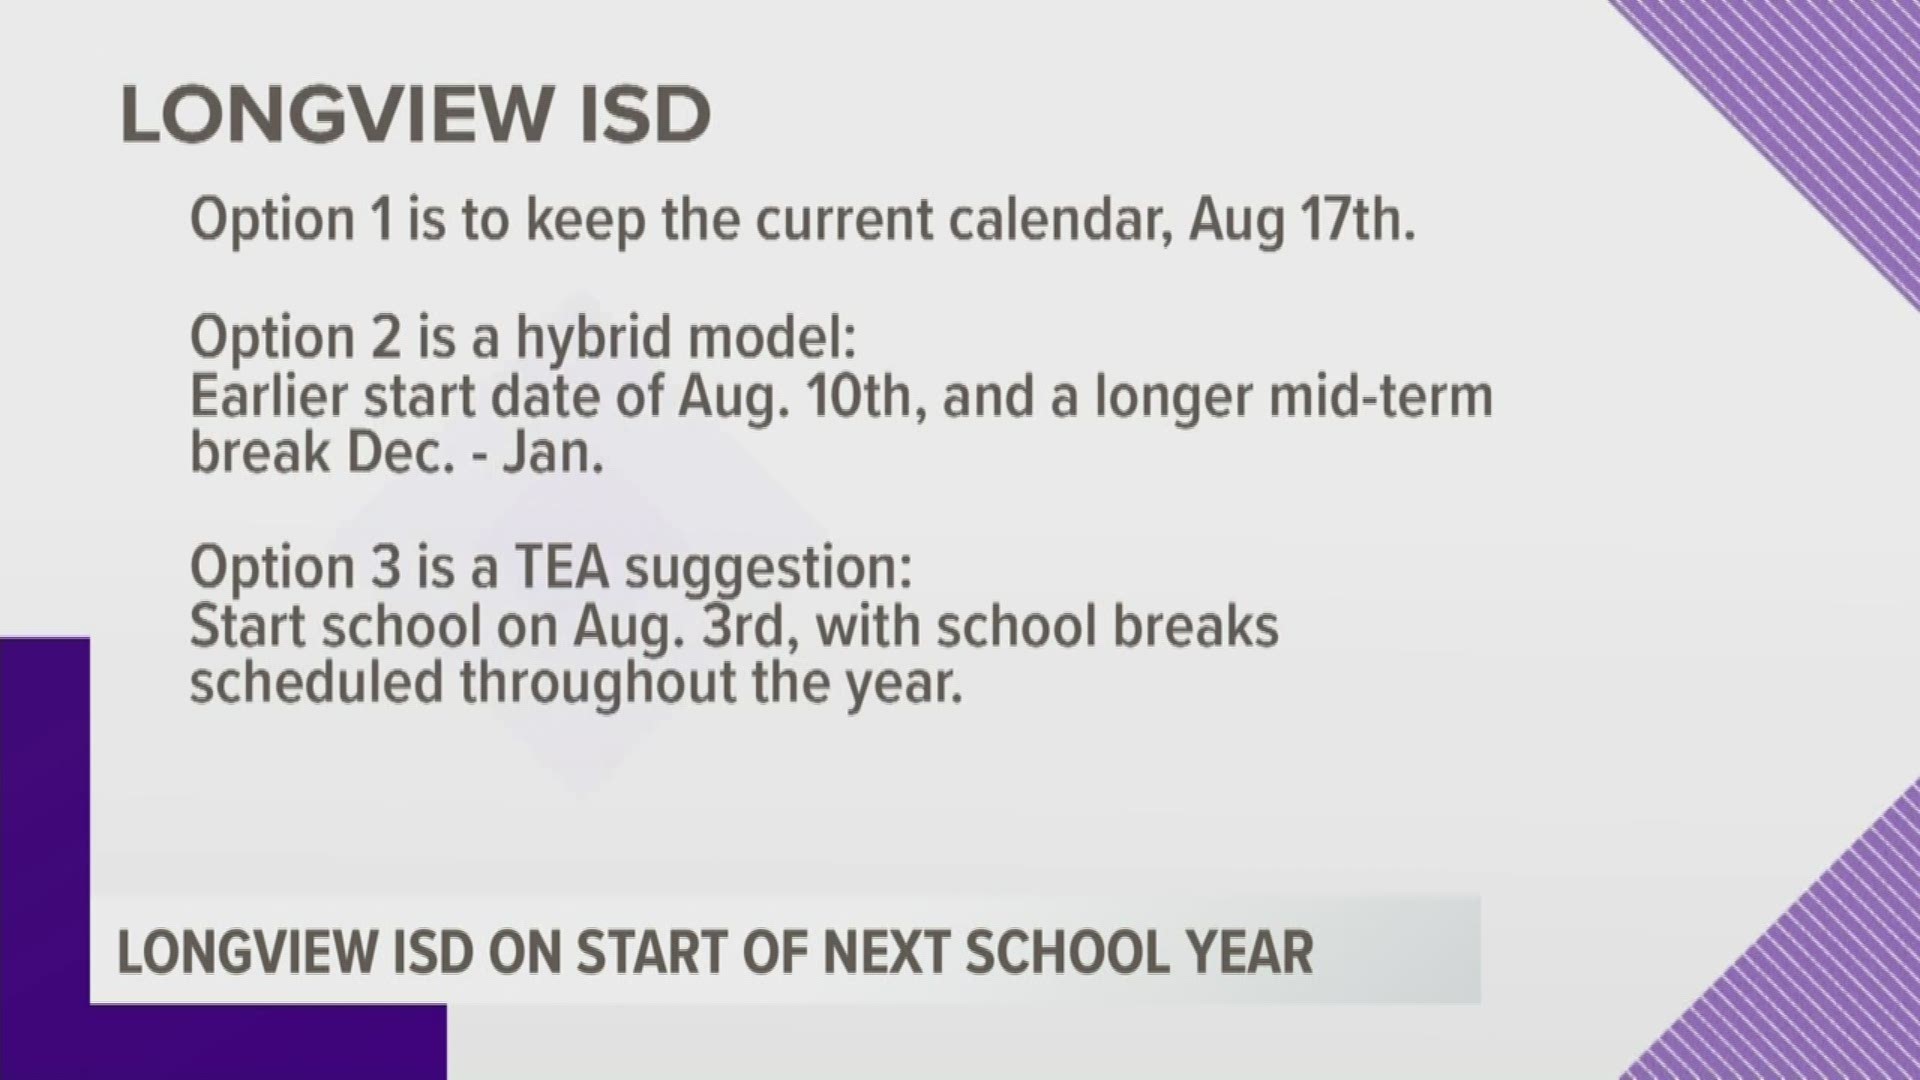 Longview Independent School District is asking parents and staff which starting date they prefer for the 2020-21 school year.